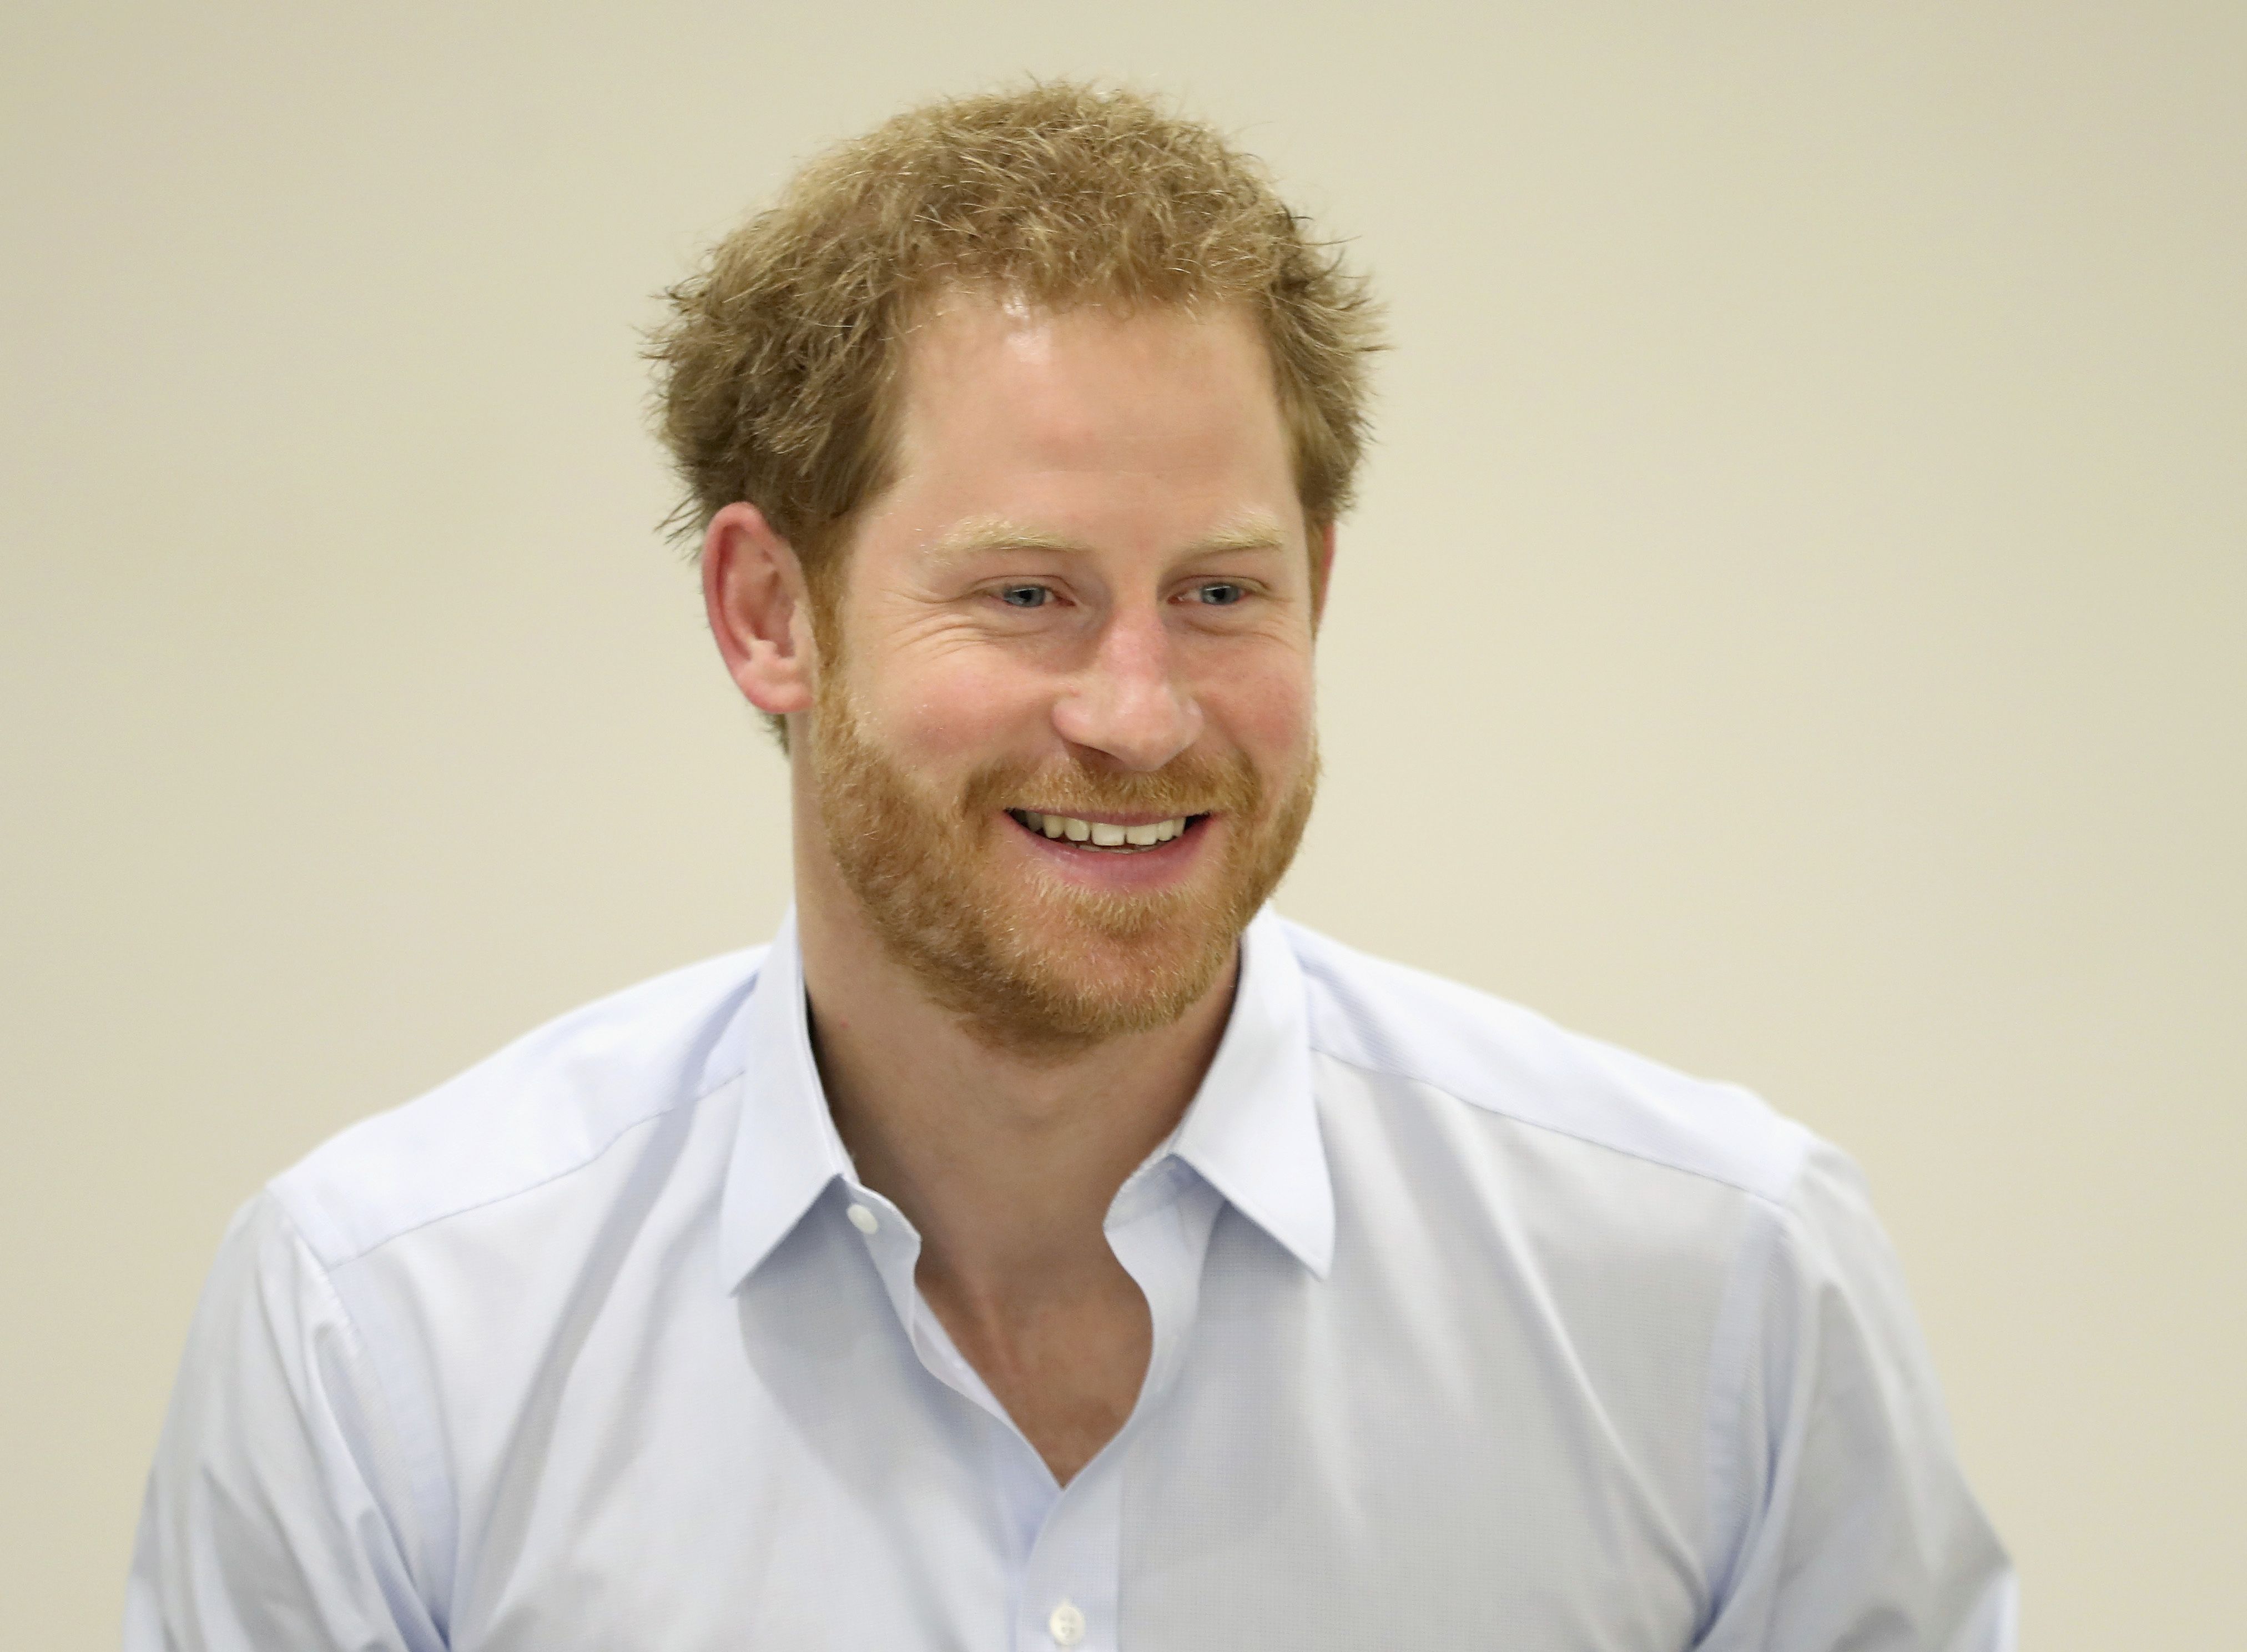 Prince Harry says Charles "was there for us" after Diana's death